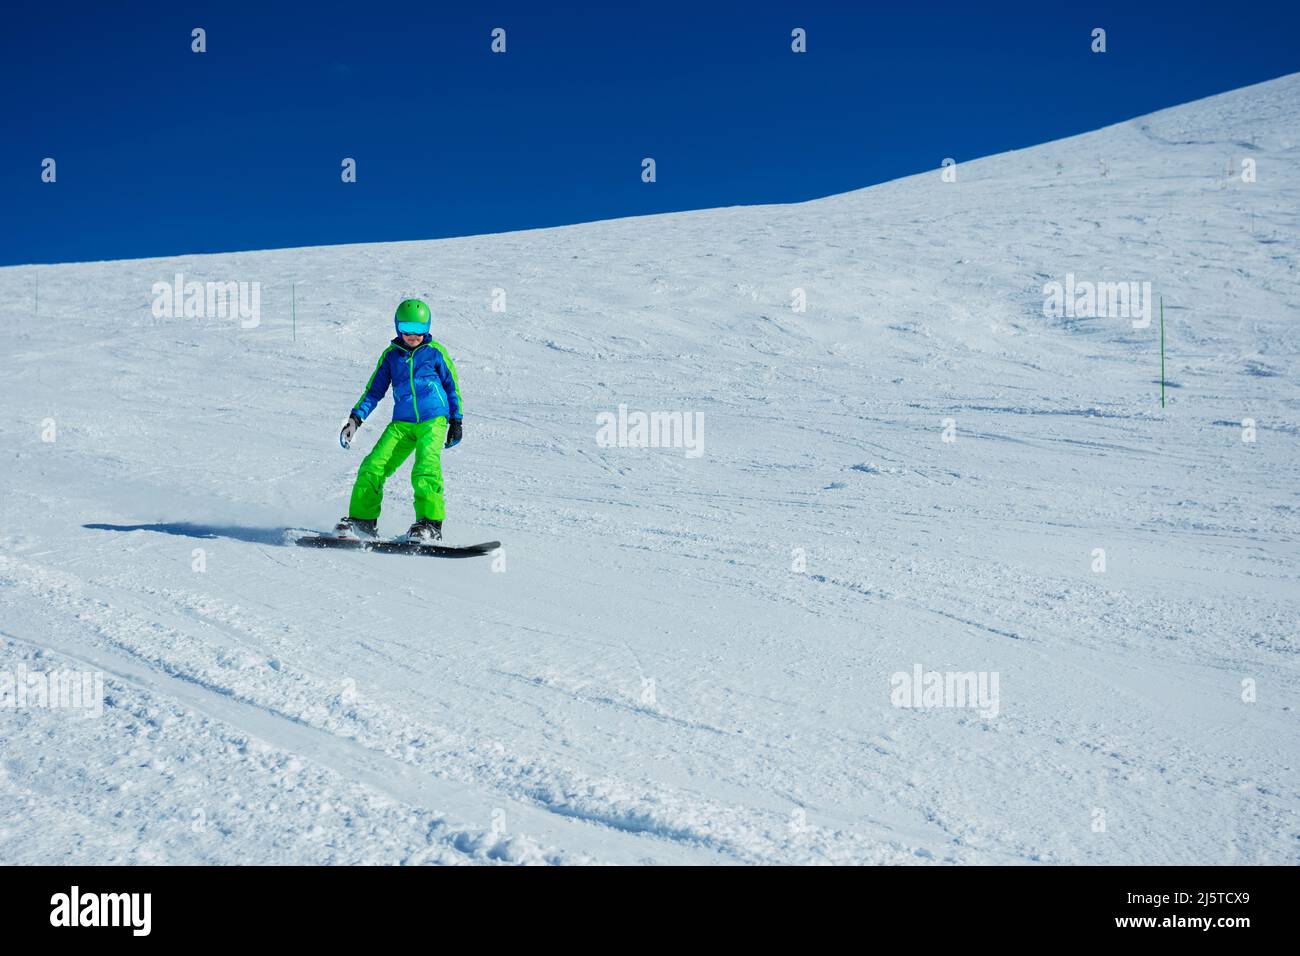 Action snowboarder boy go downhill image on snowboard, side view Stock Photo